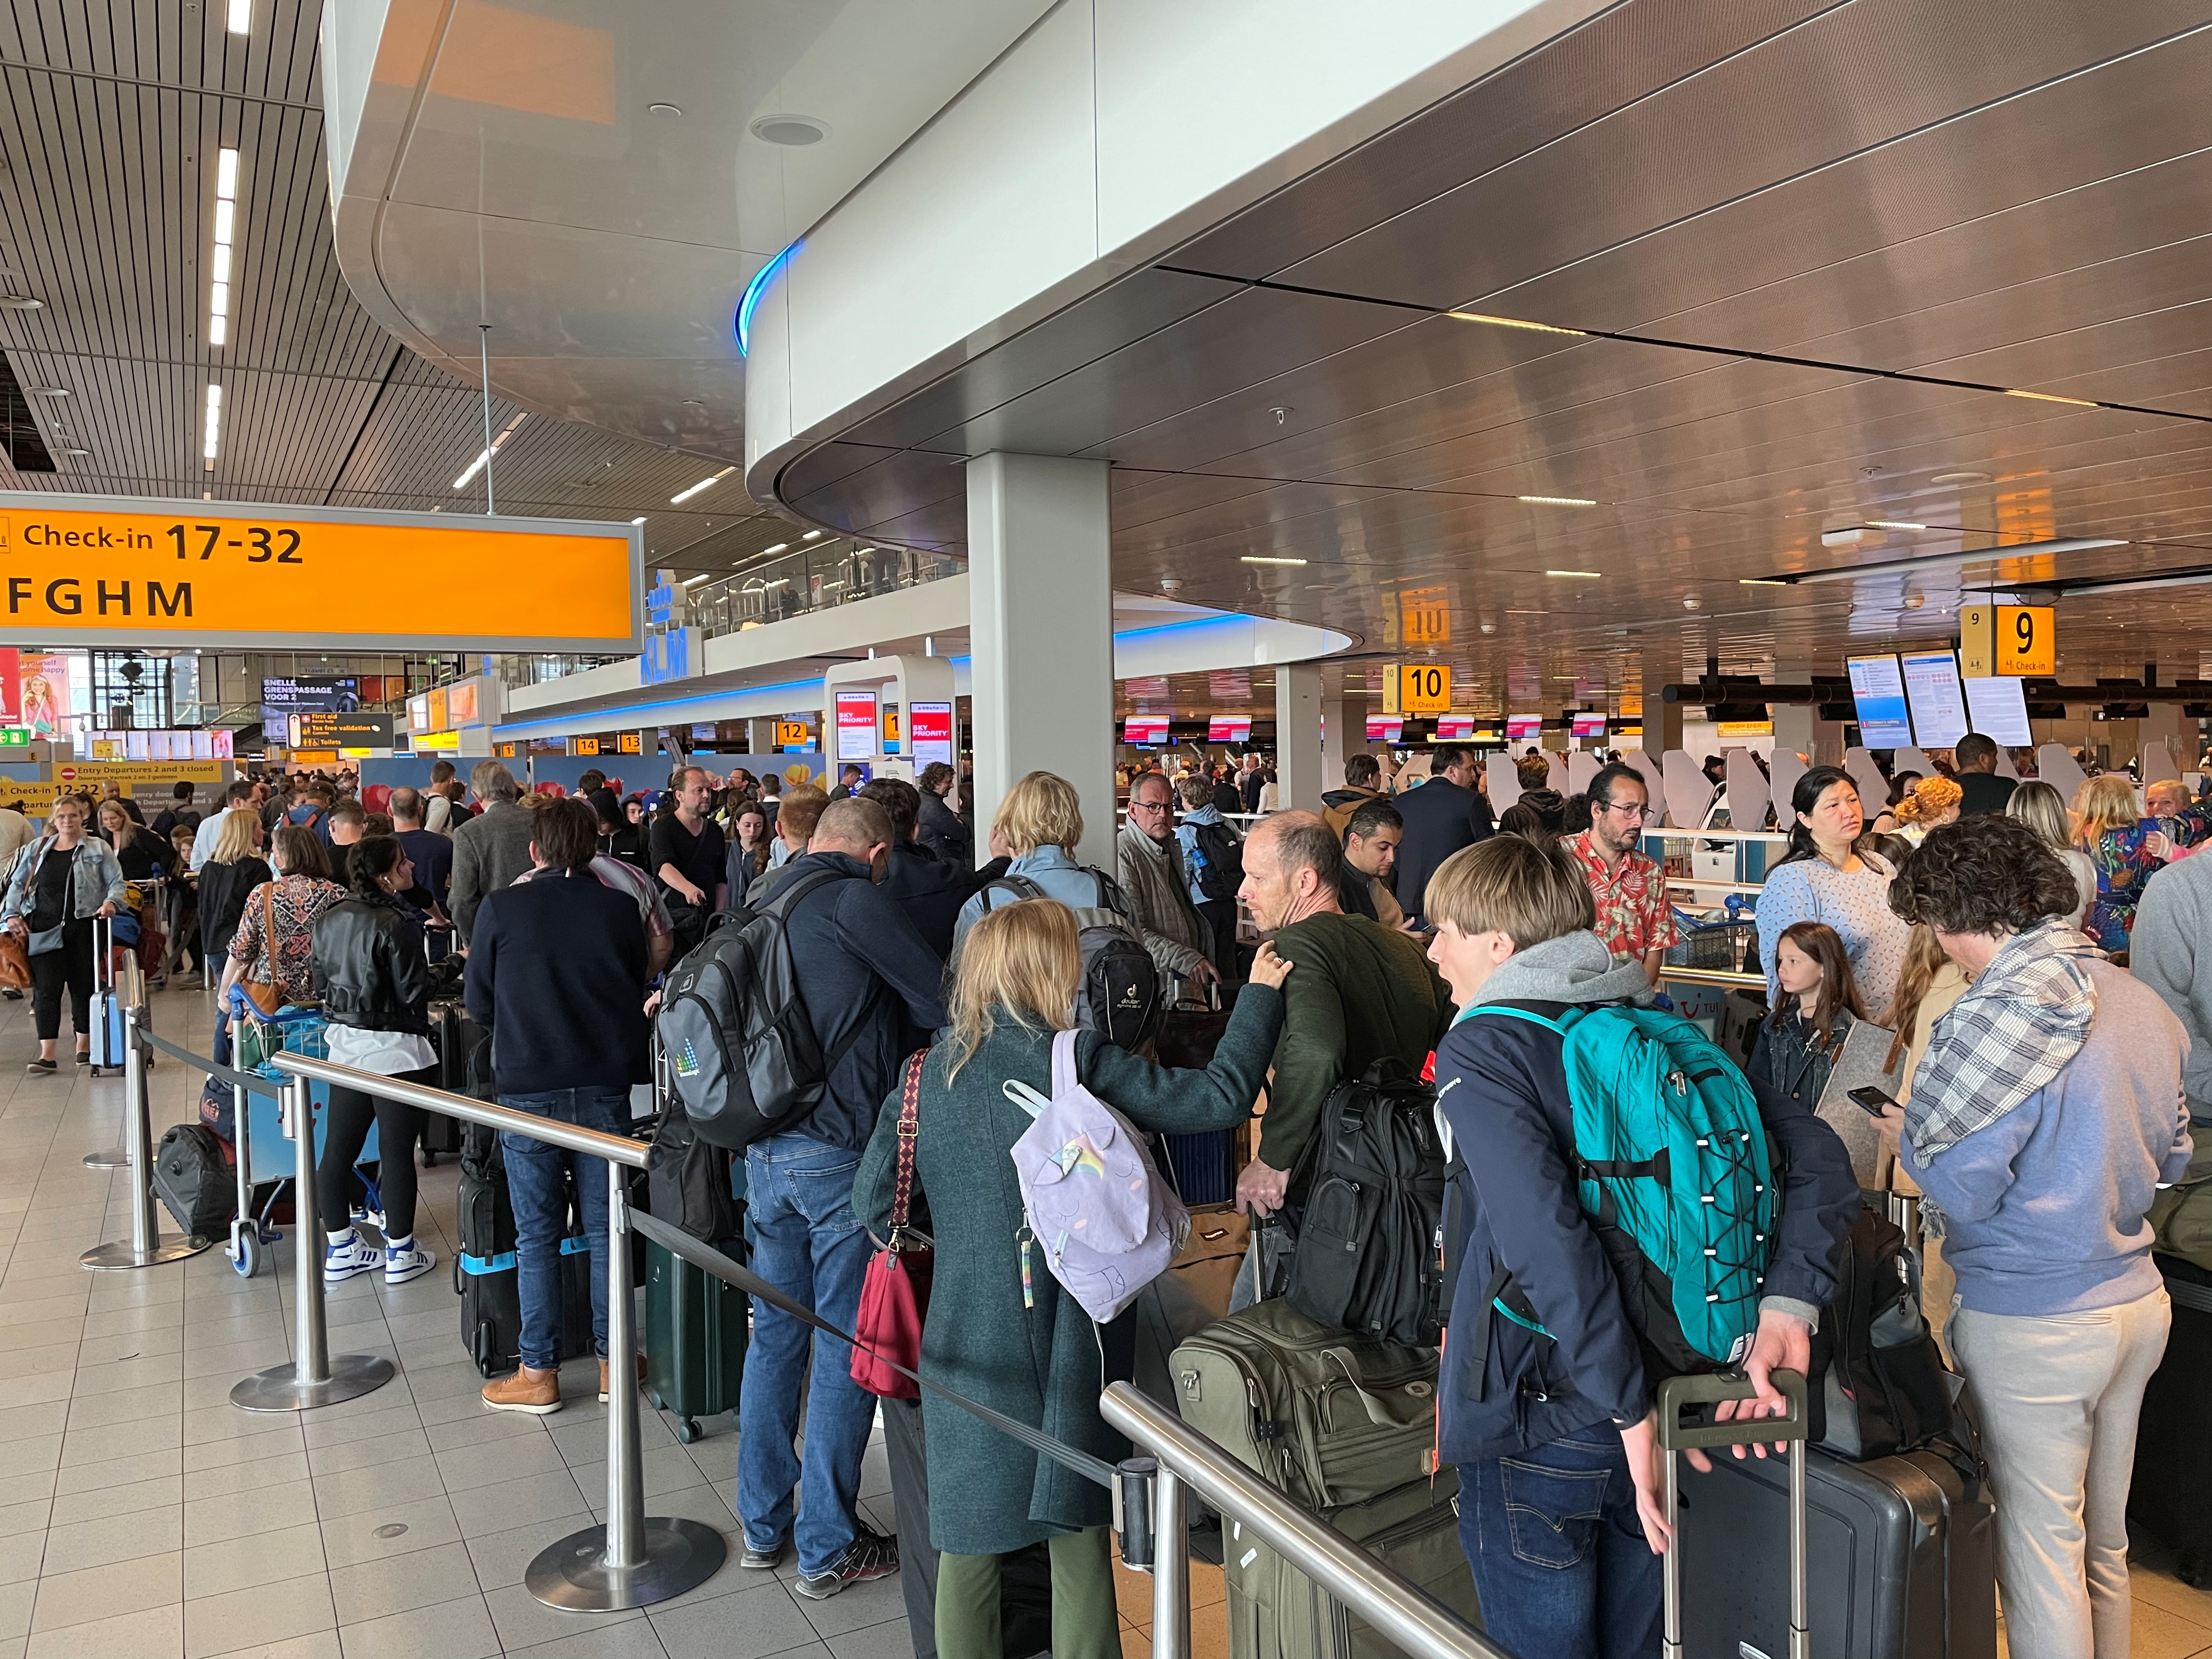 Long lines of waiting travellers at Amsterdam Schiphol Airport due to unannounced strike